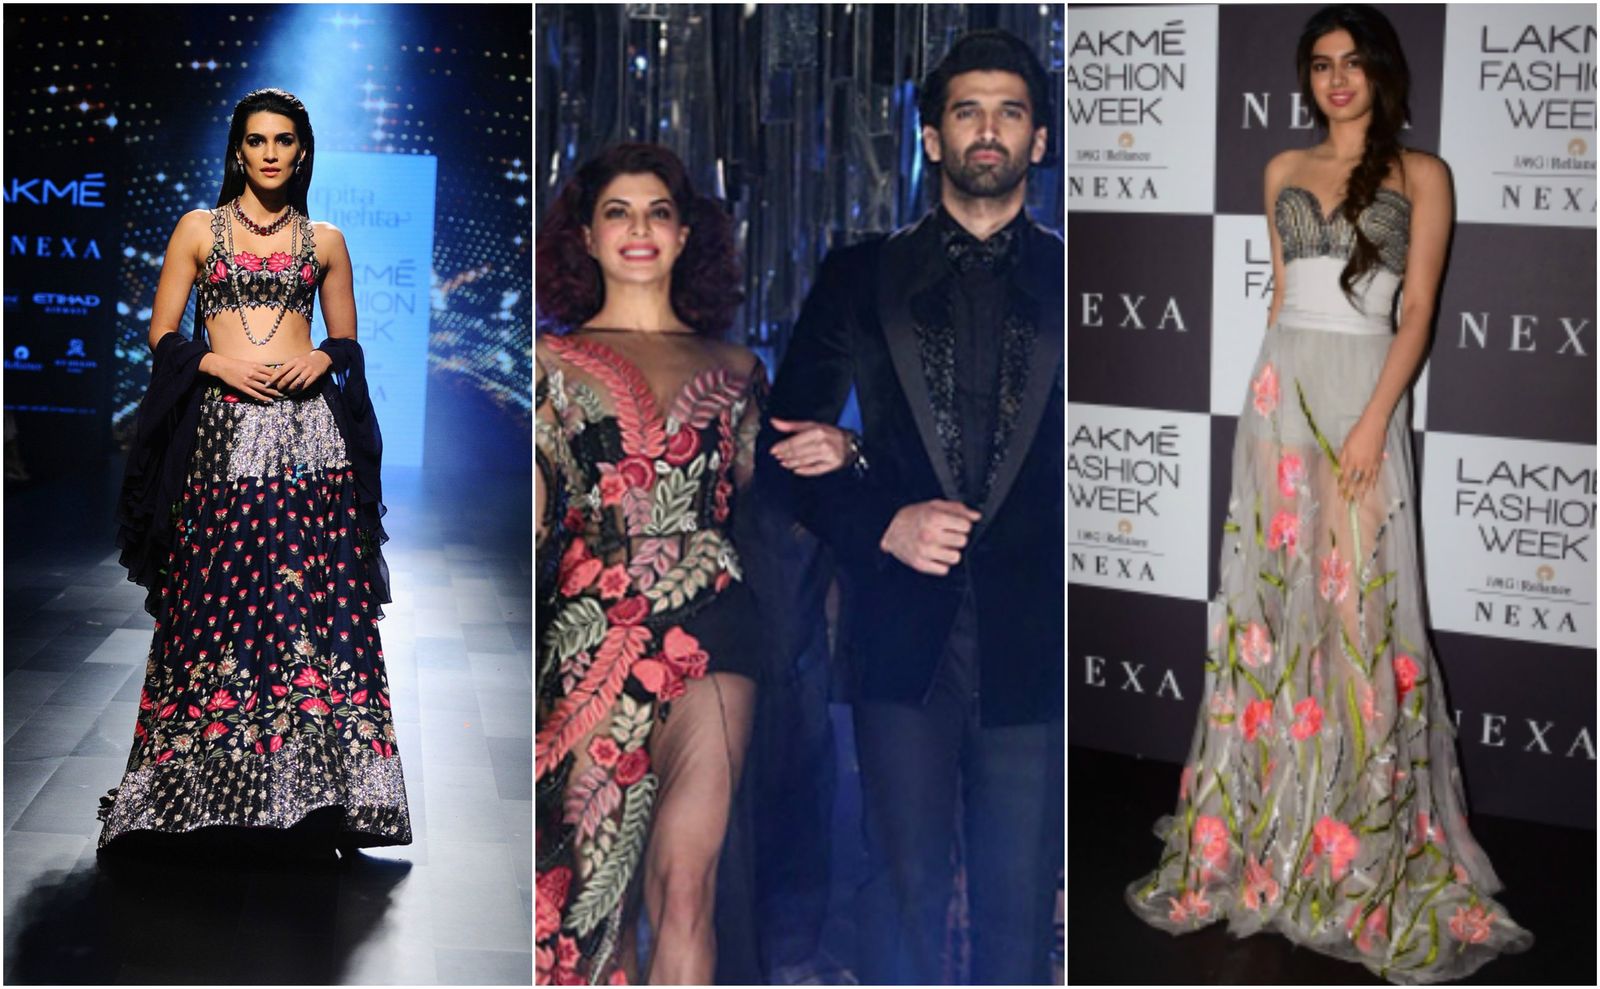 Jacqueline Fernandez And Aditya Roy Kapur Set The Ramp On Fire While Khushi Kapoor Turns Heads At LFW'17!